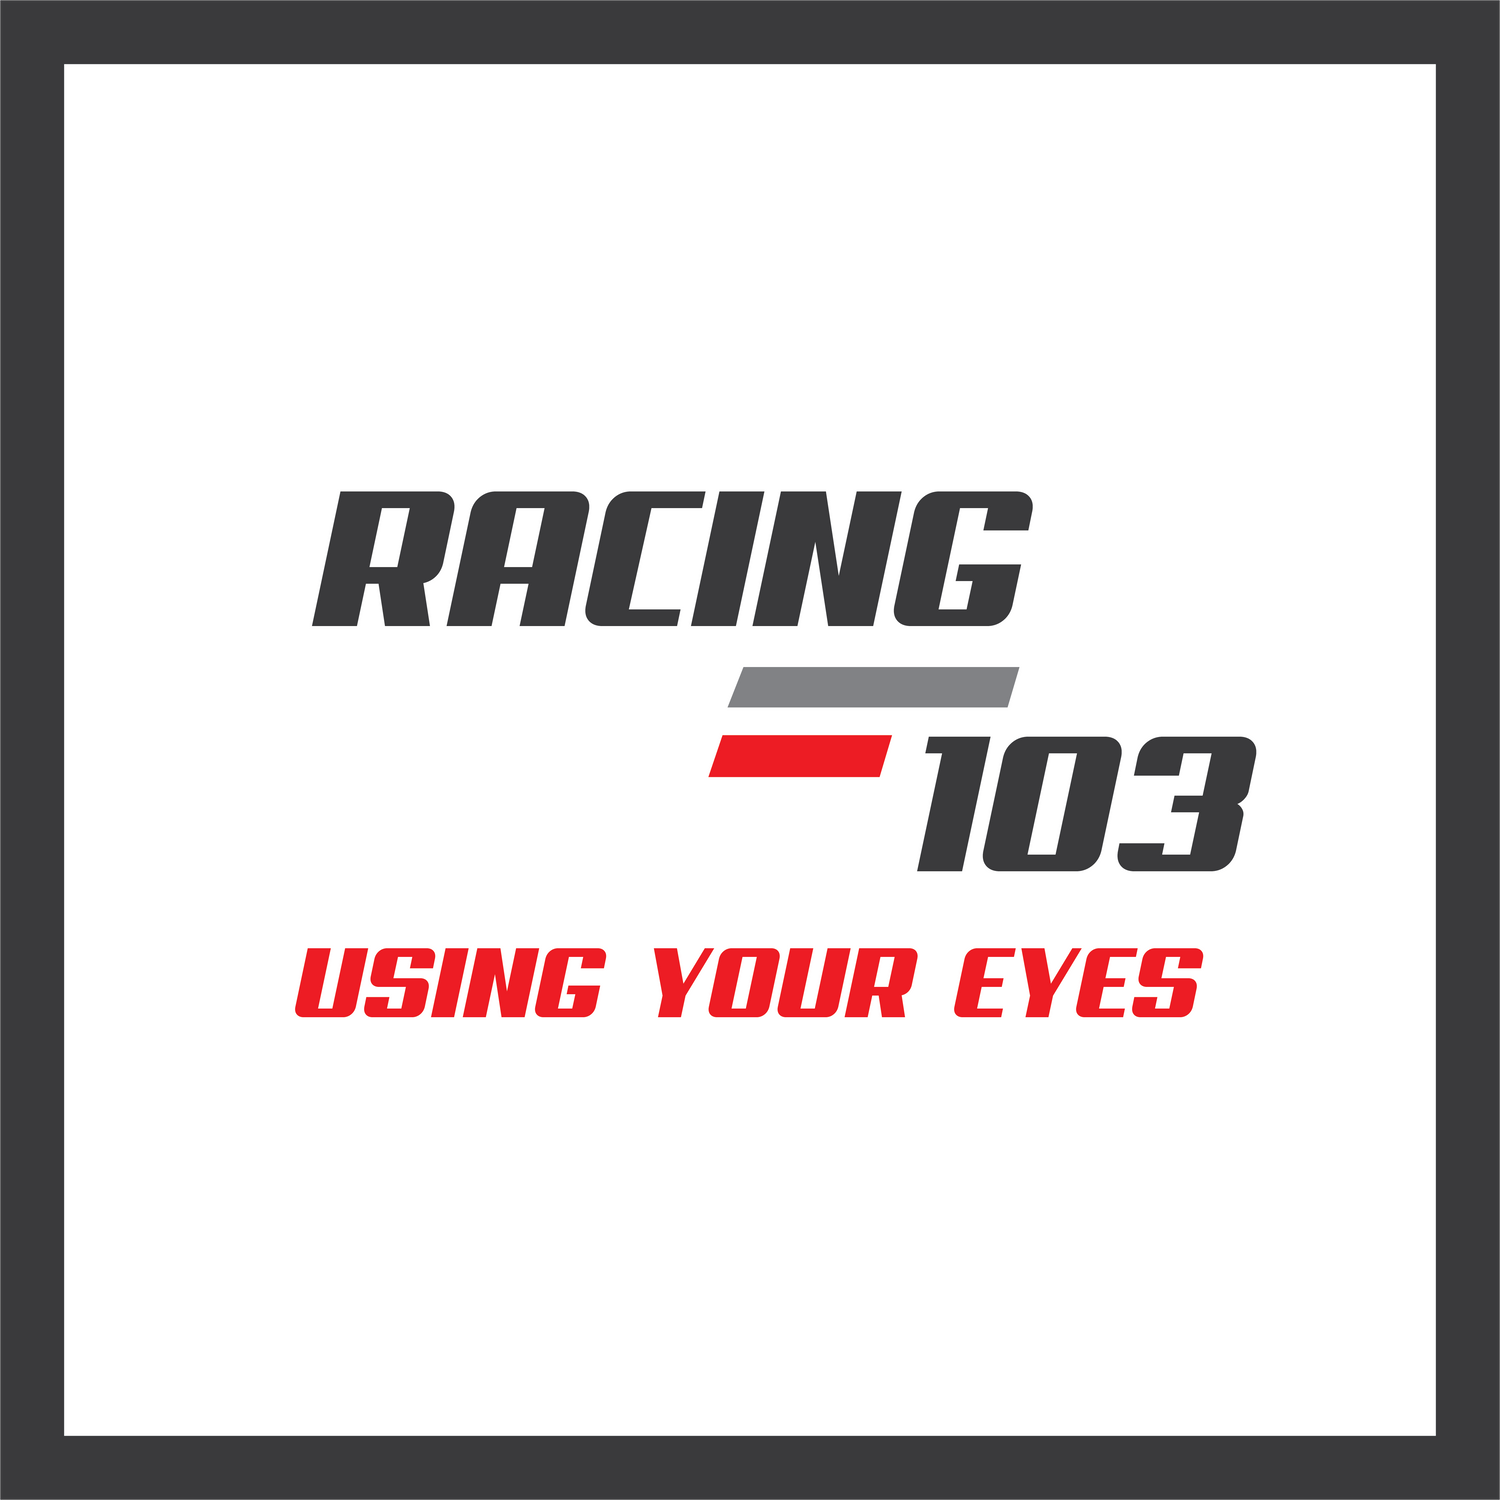 Racing 103 - Using Your Eyes